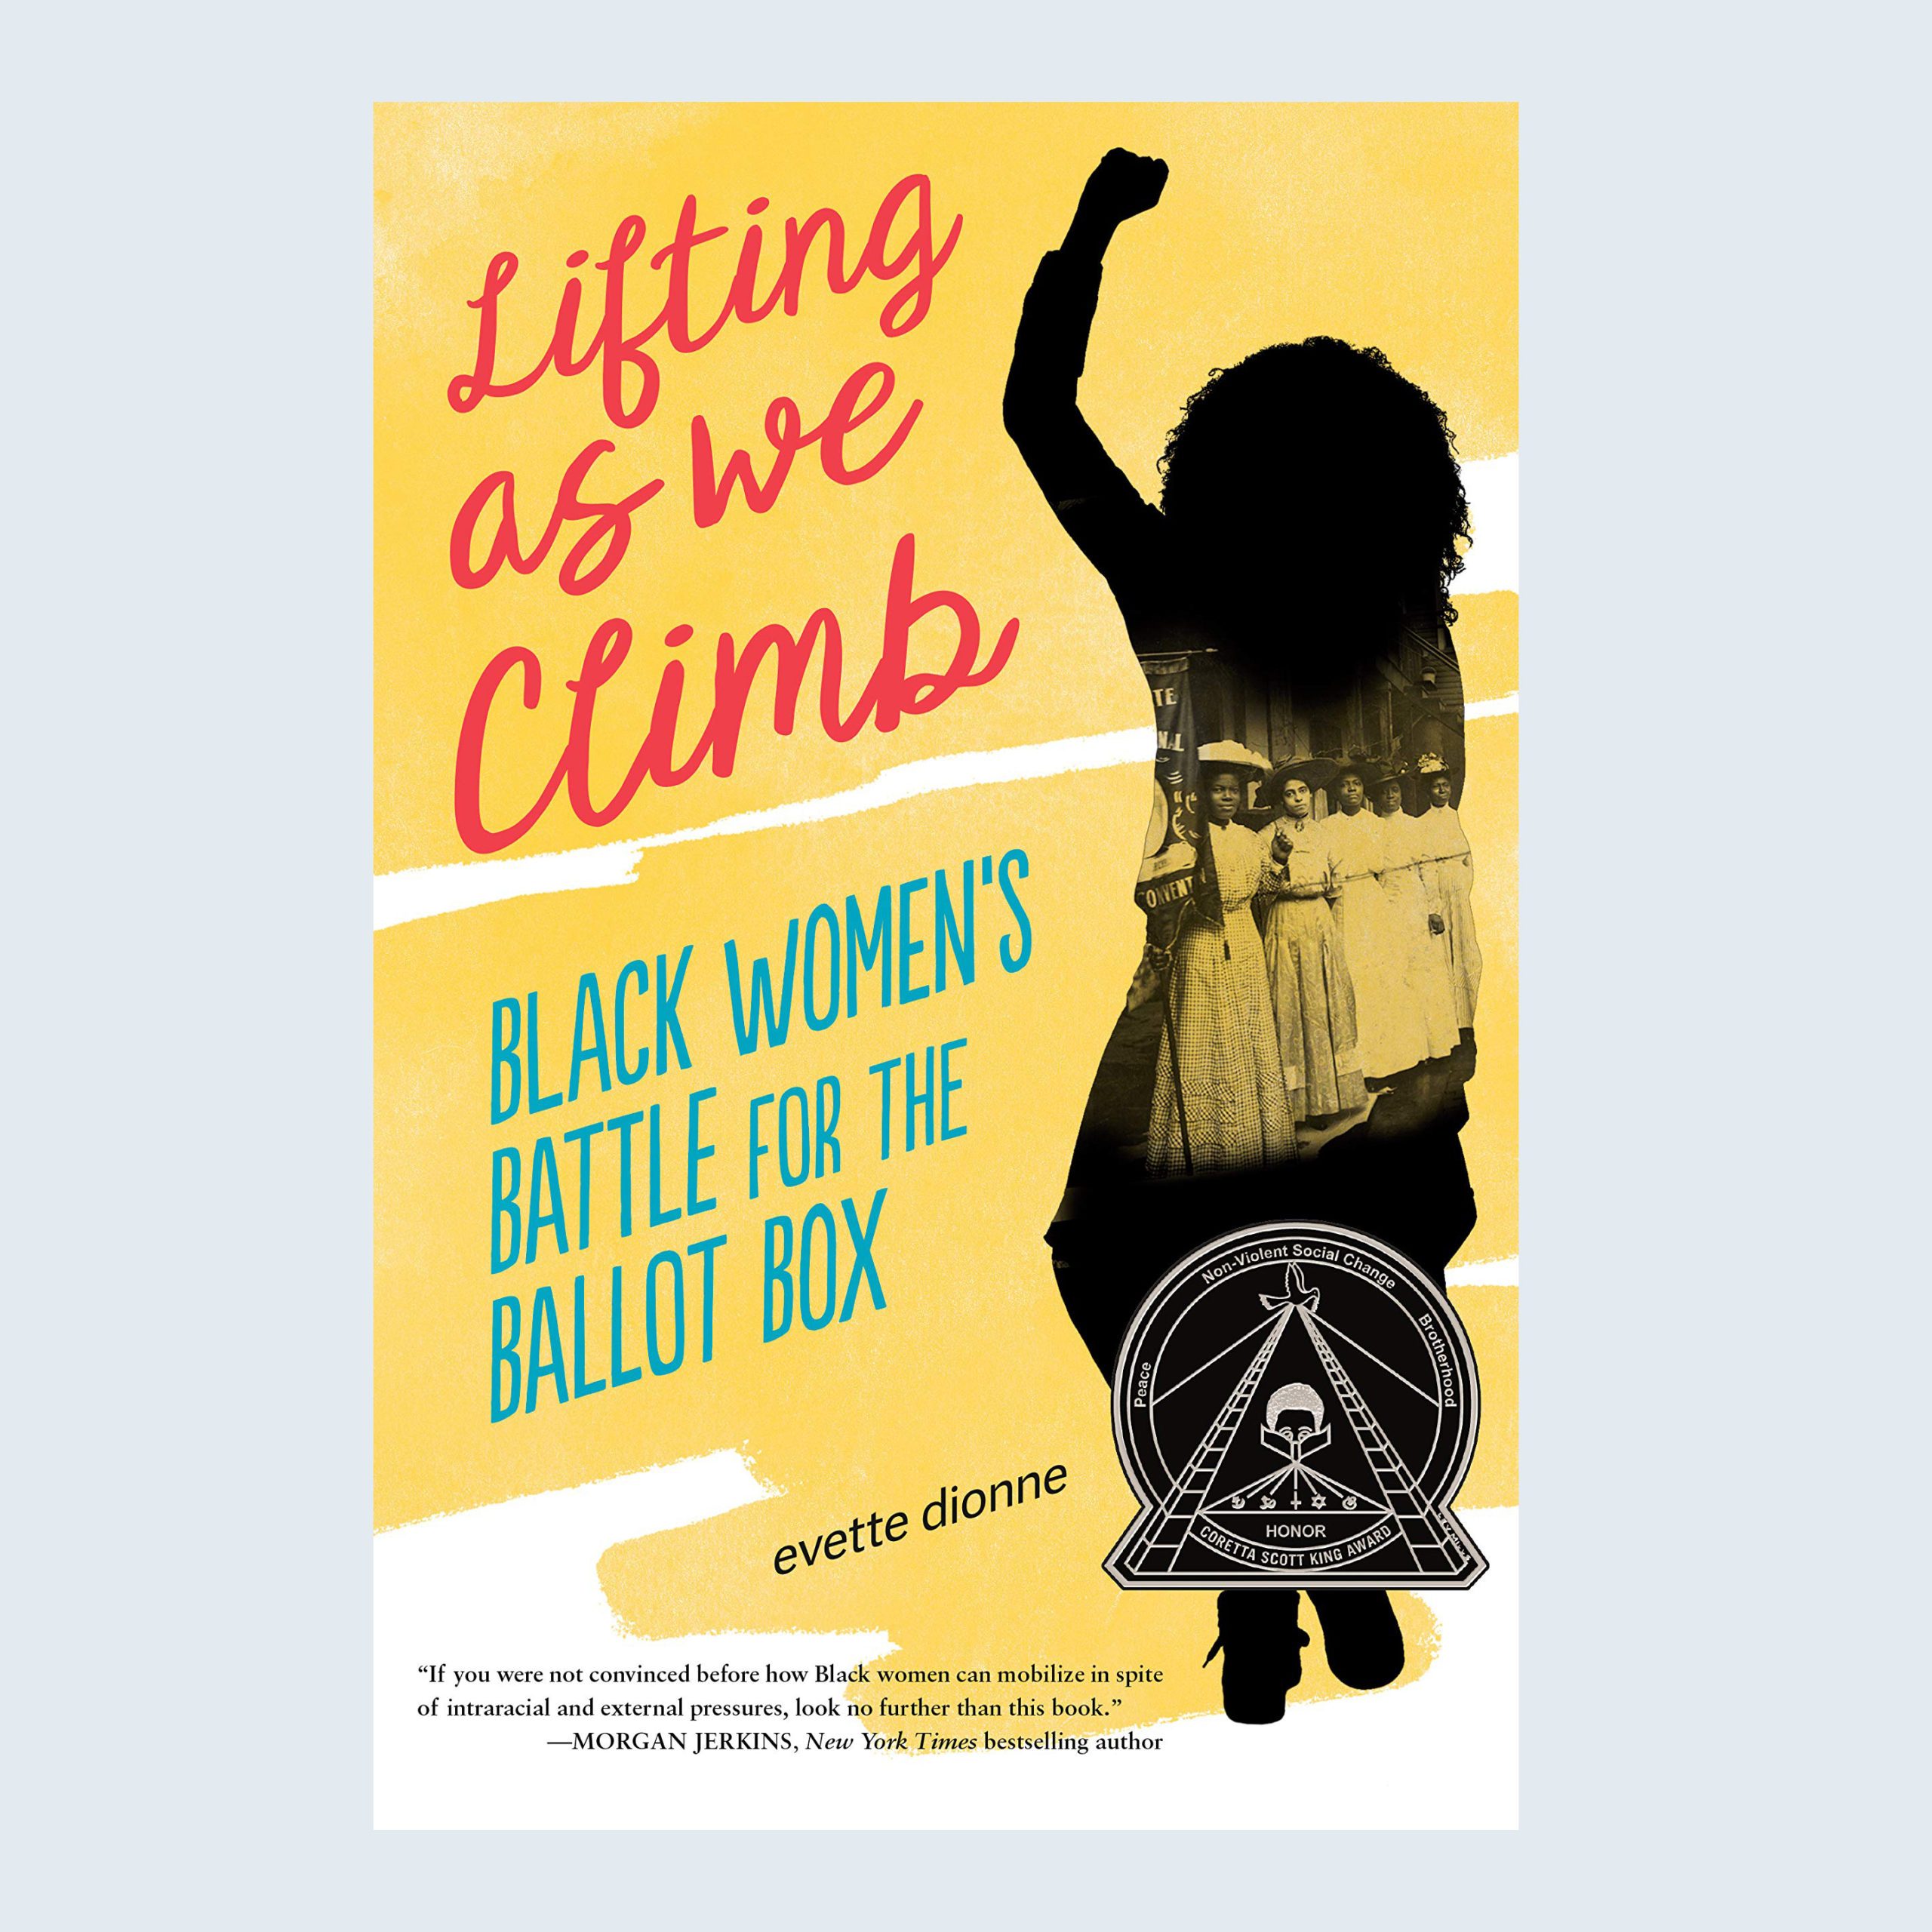 Lifting As We Climb: Black Women's Battle for the Ballot Box by Evette Dionne